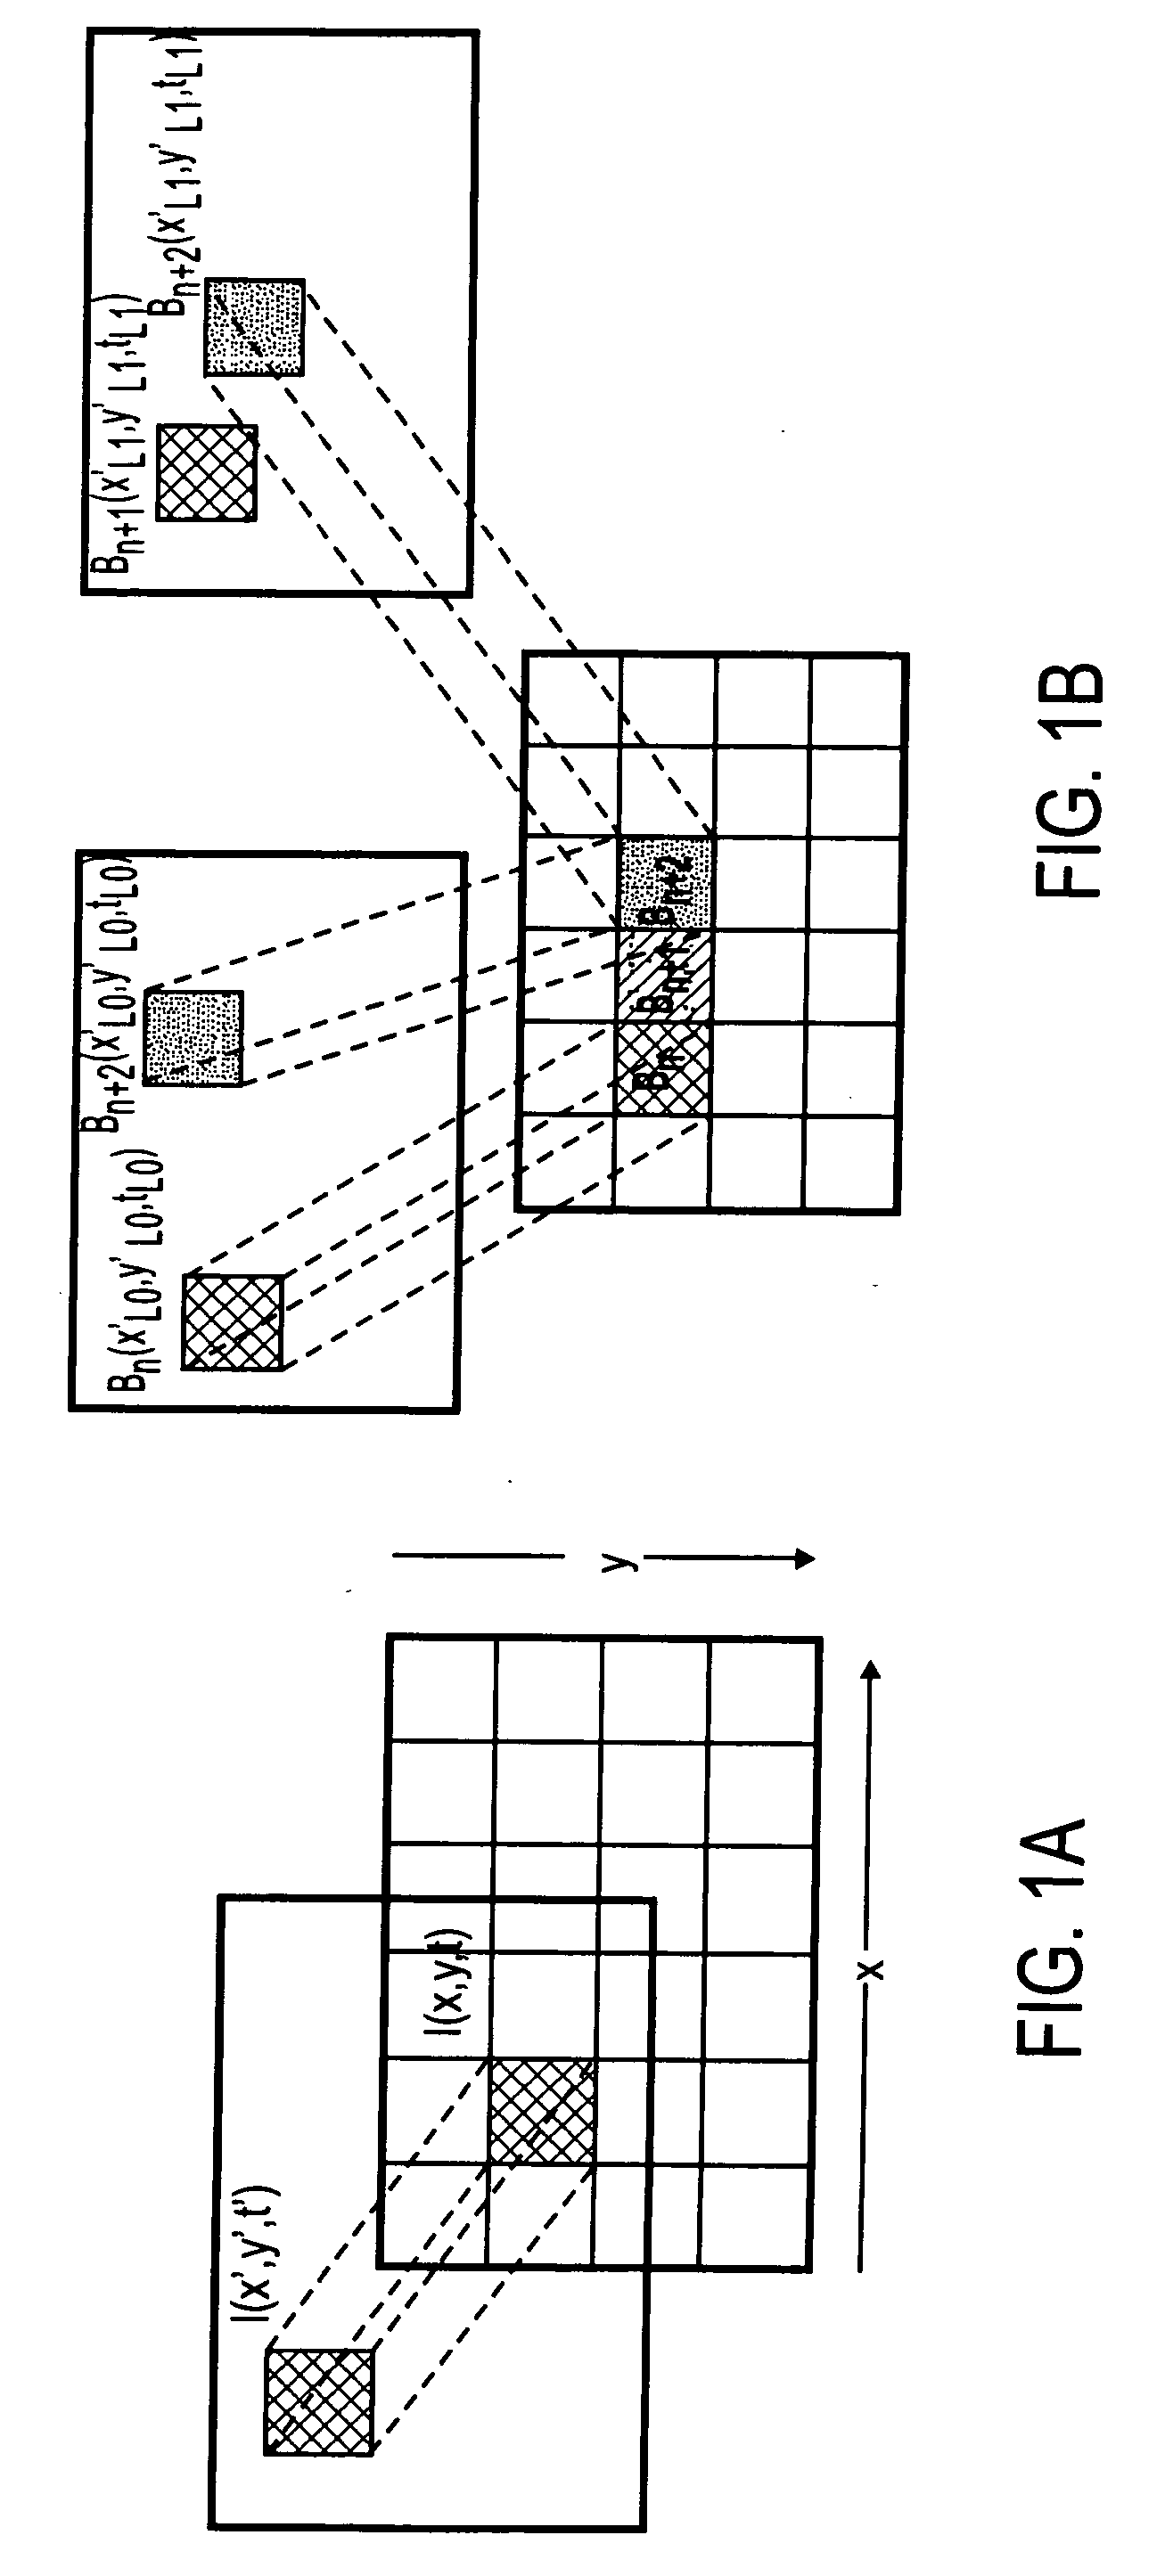 Method and apparatus for video encoding and decoding using adaptive interpolation